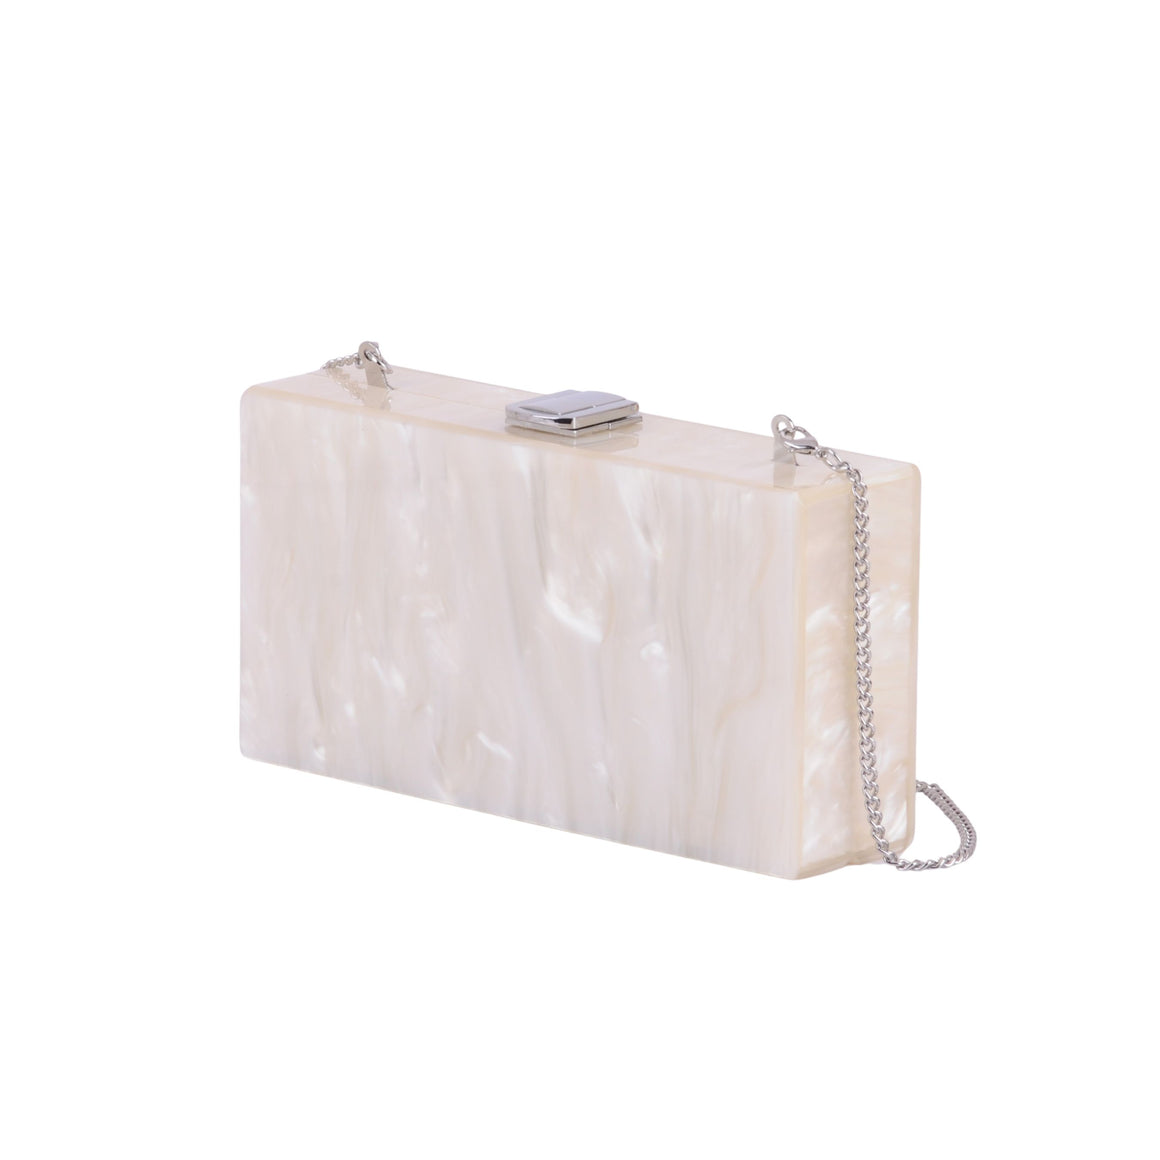 1605 - Ethereal Elegance: White Bridal Acrylic Clutch with Chain Crossbody Strap